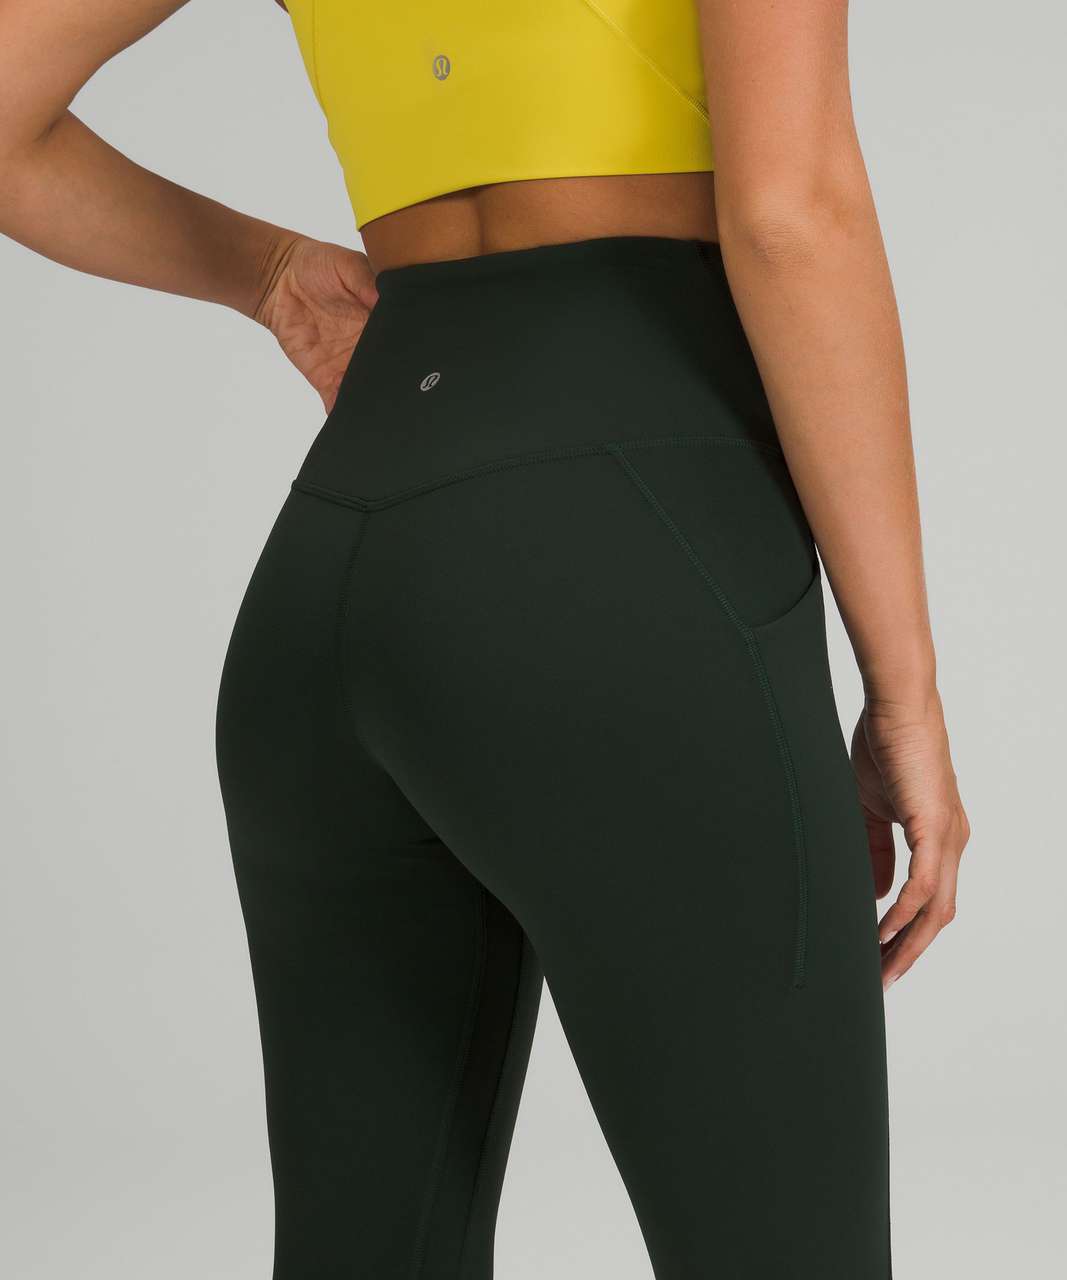 Lululemon Align High-Rise Pant with Pockets 28" - Rainforest Green